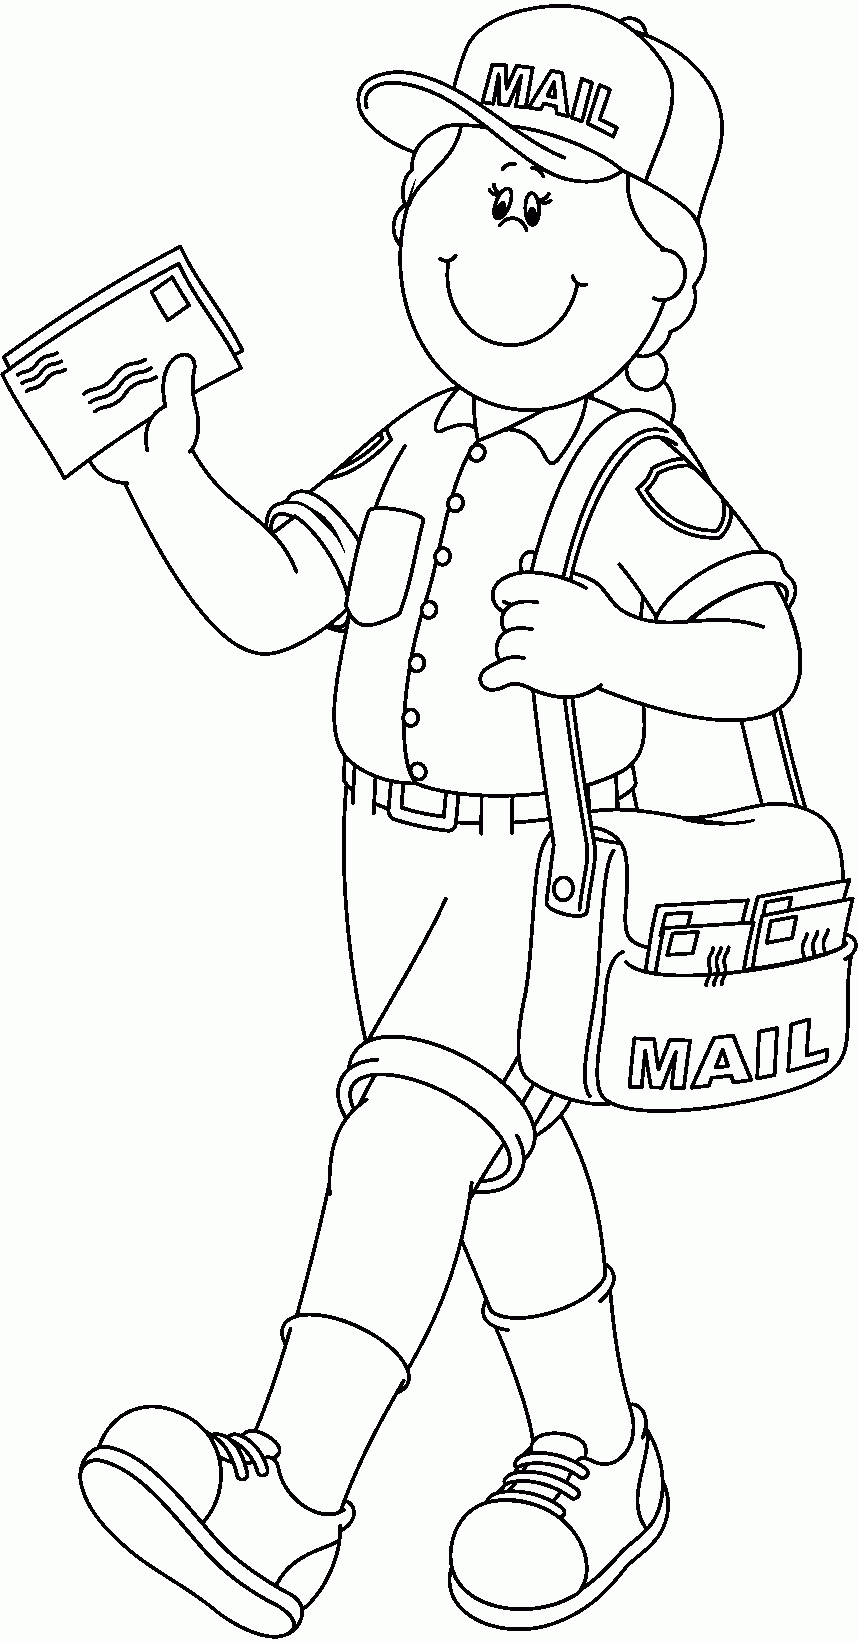 10 Pics of Mailman Community Helper Coloring Pages - Community ...